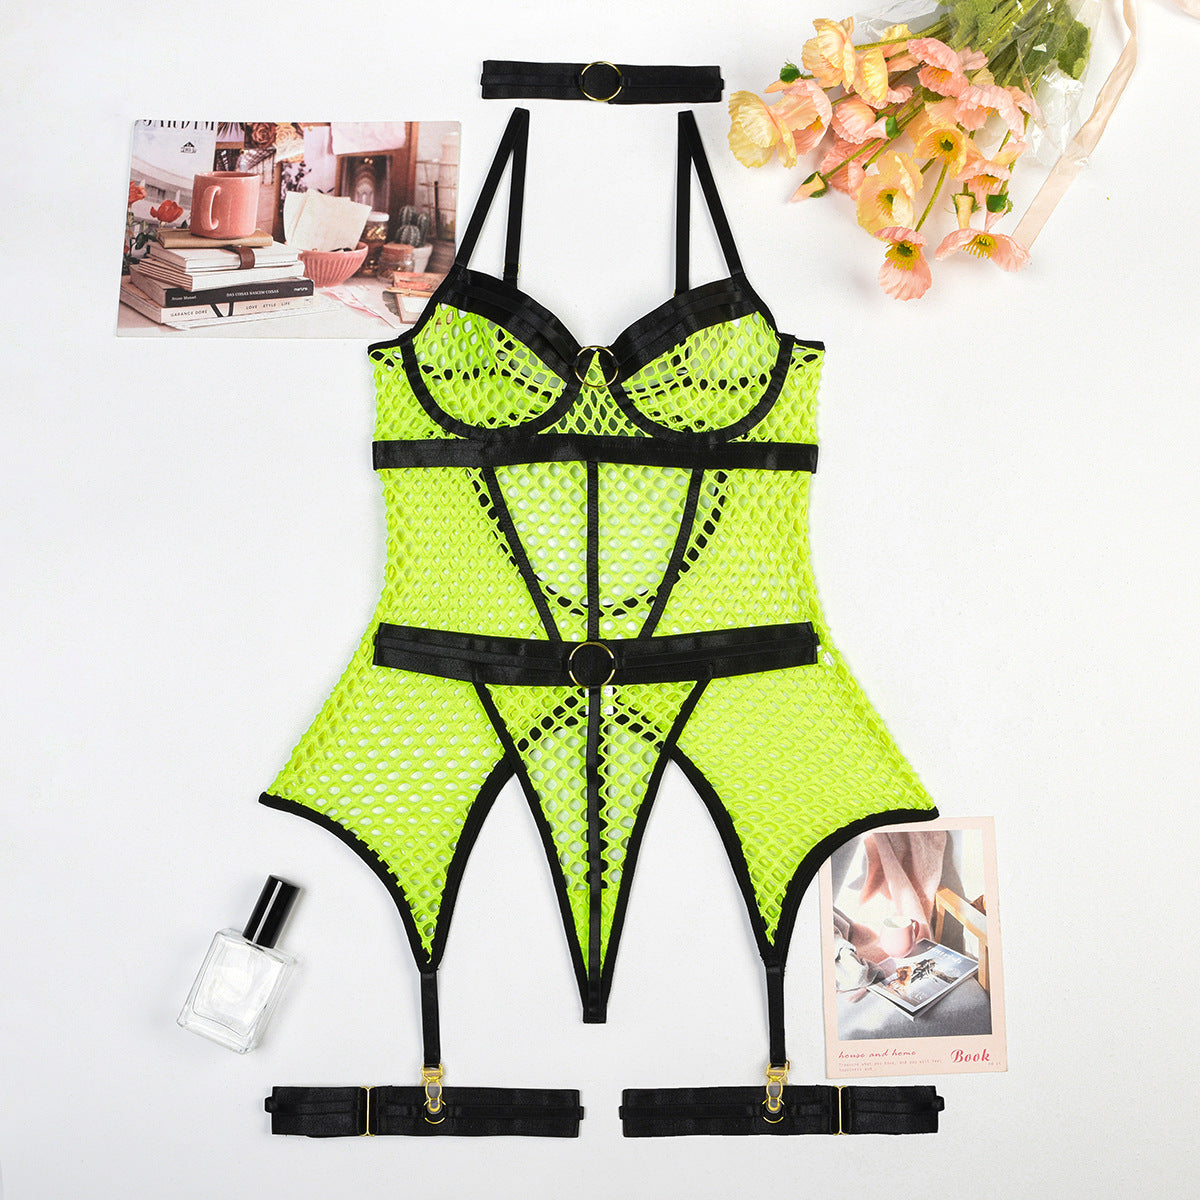 Women's Hot One-piece Sexy Lingerie